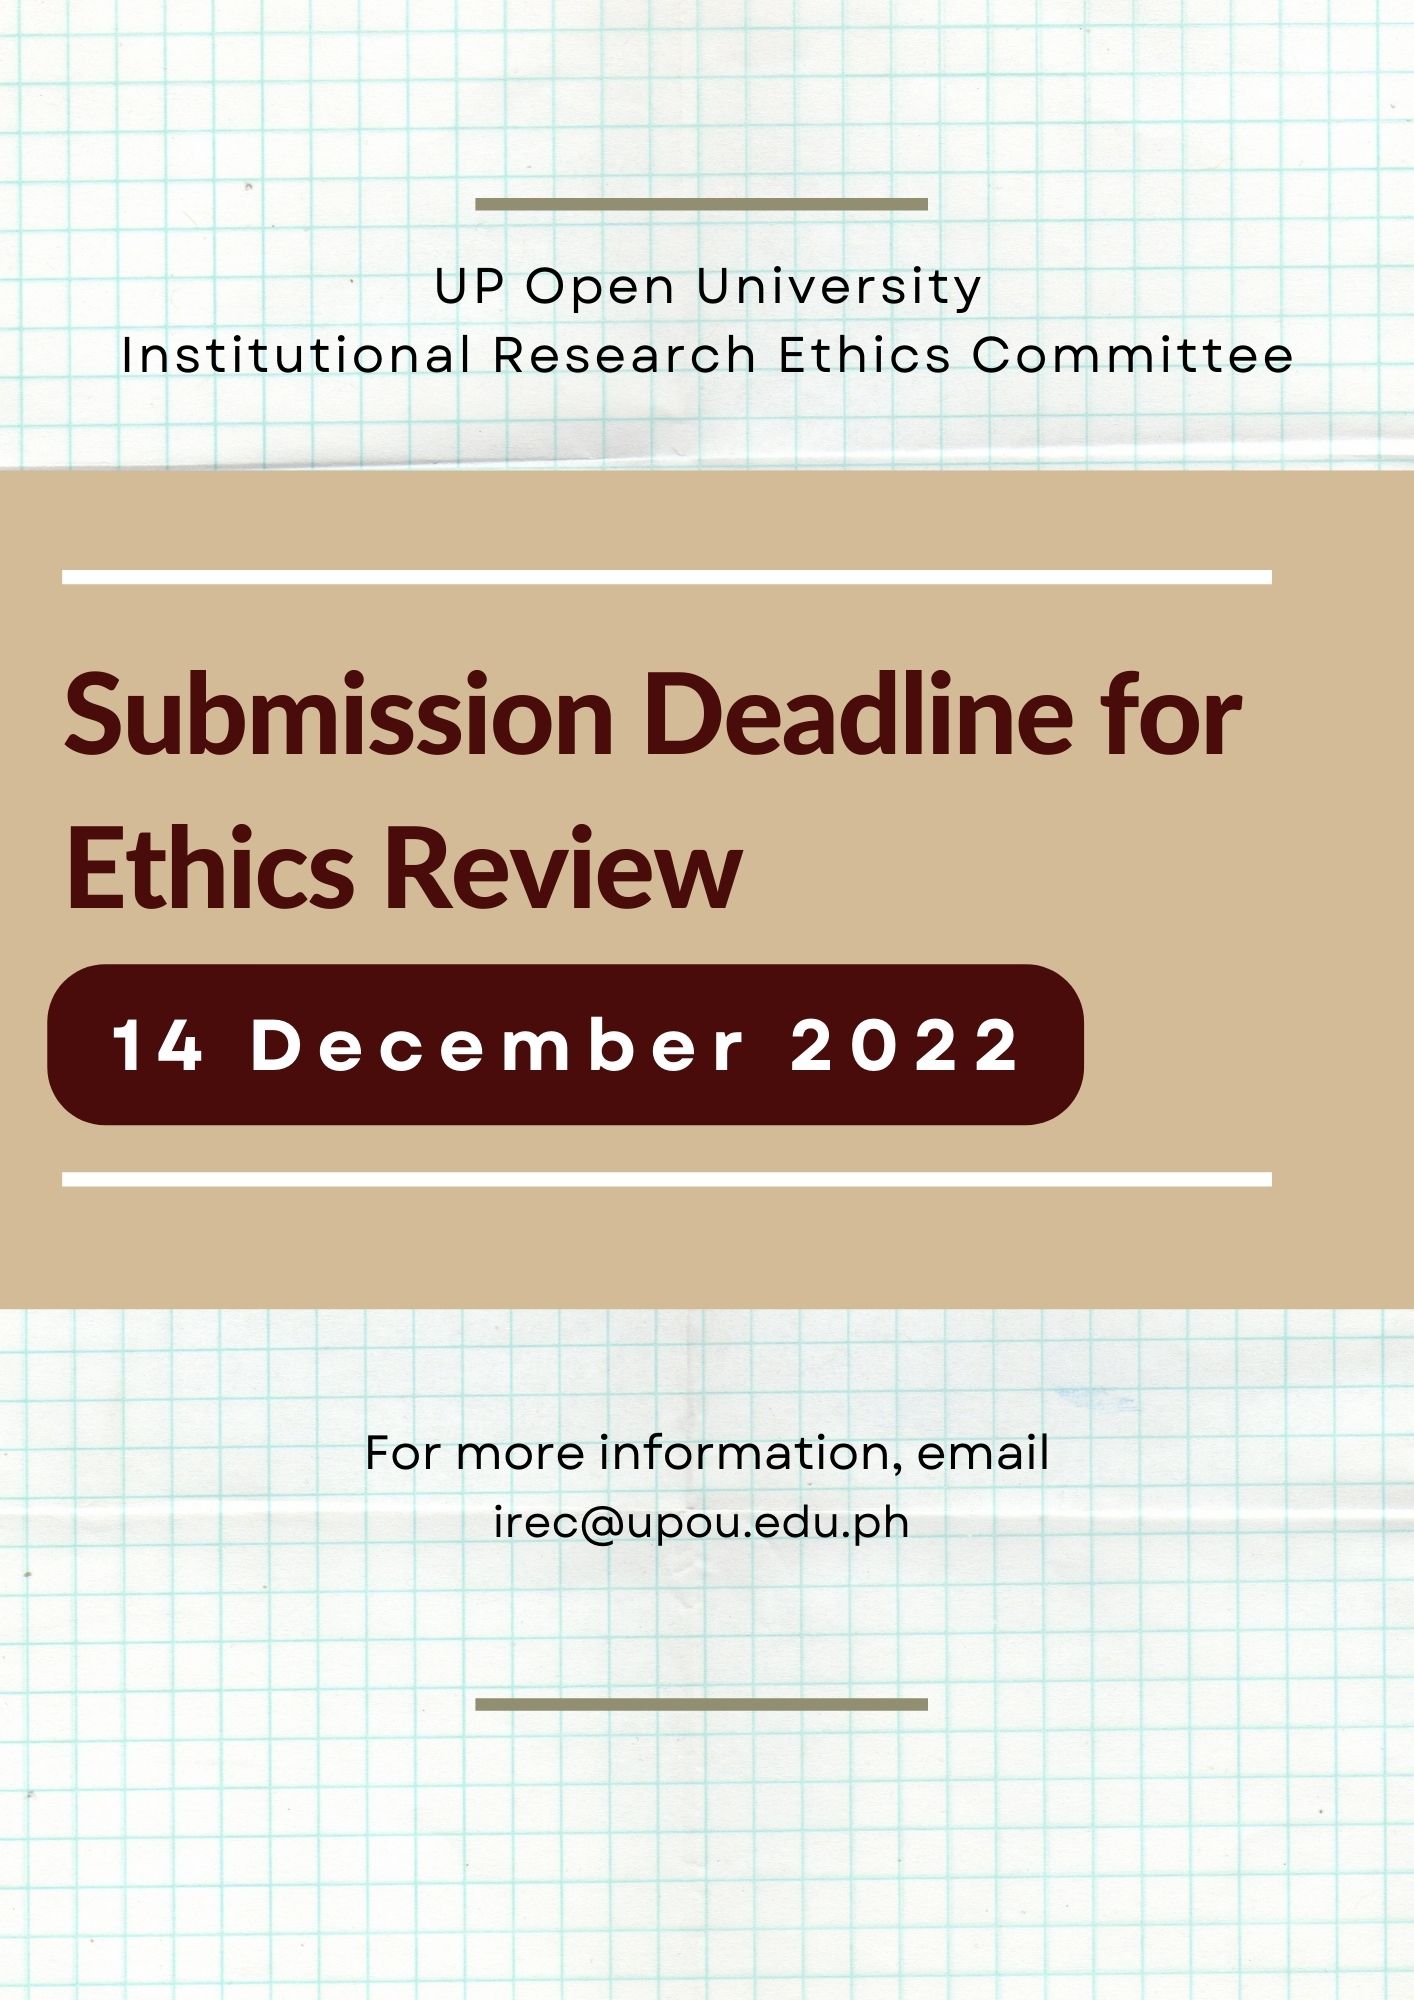 Submission Deadline for Ethics Review